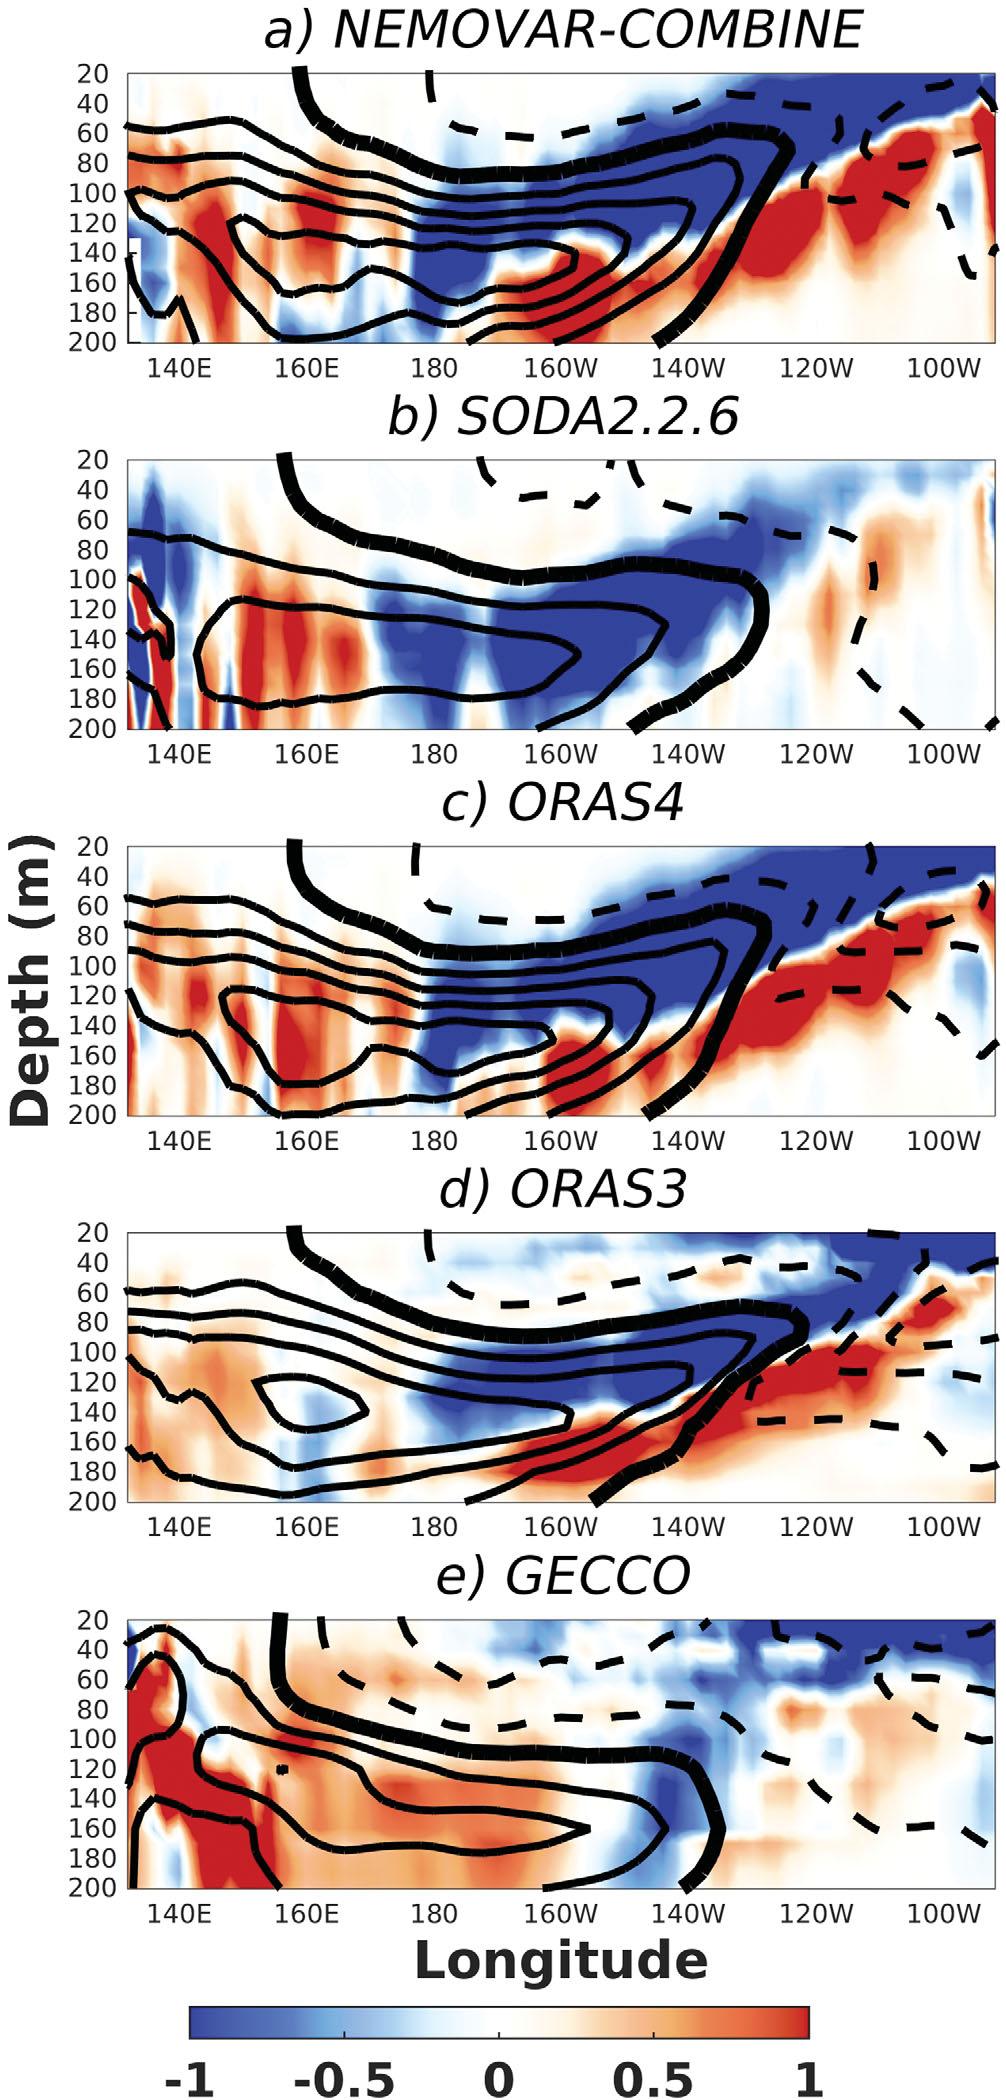 depth composite along the equatorial Pacific (2S 2N, Figure 8), as well as a latitude-depth meridional transect in the central Pacific (160 150W, Figure 9).